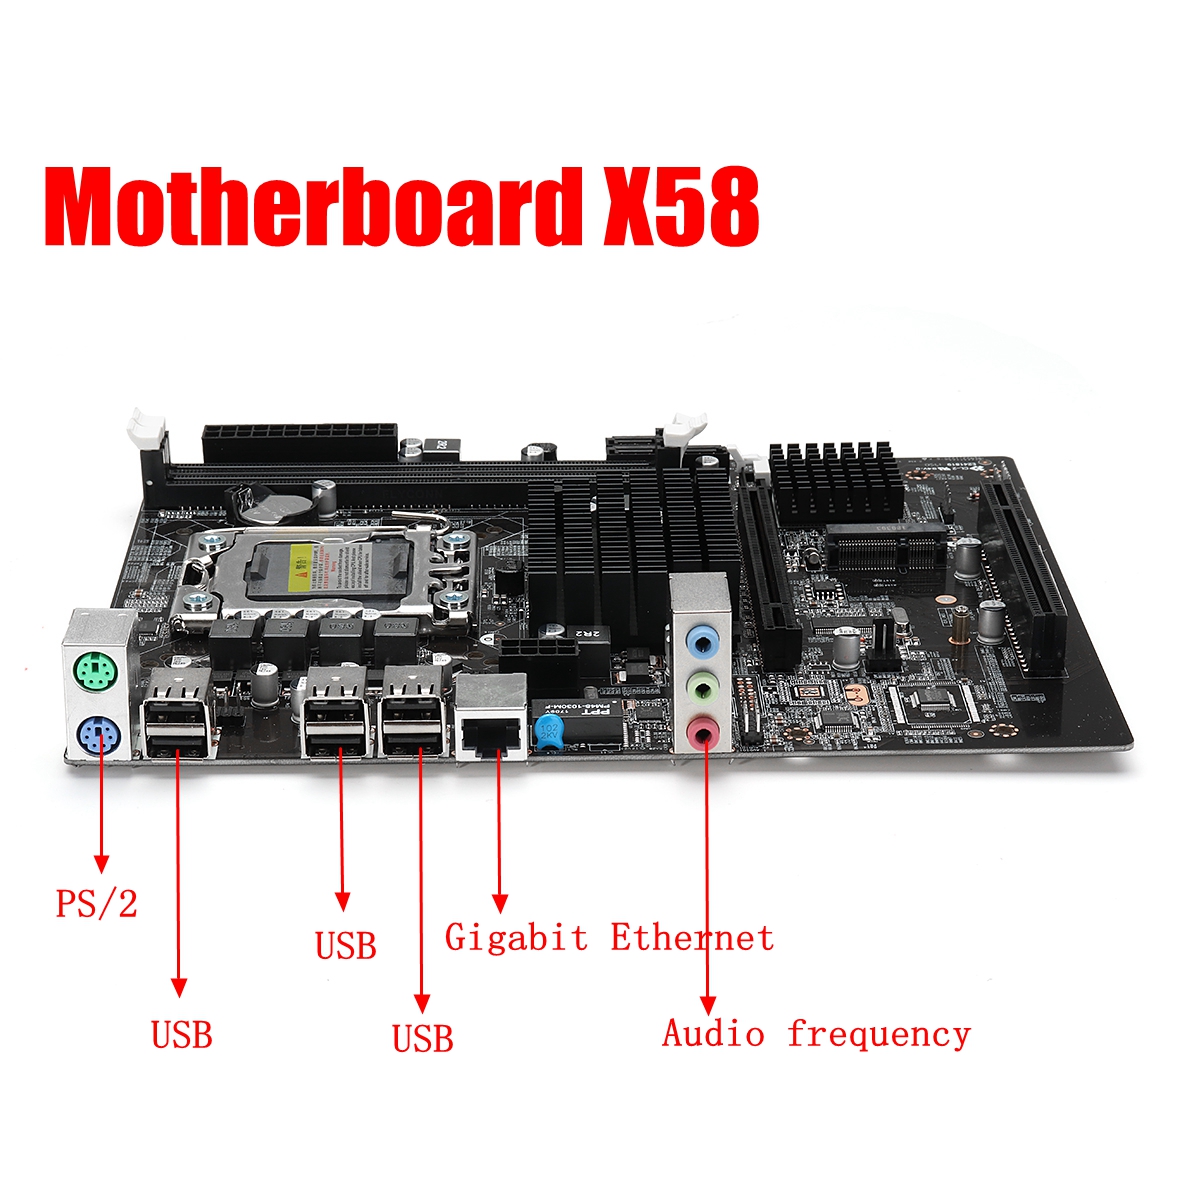 Motherboard support. X58 Chipset. Pm45-1030.